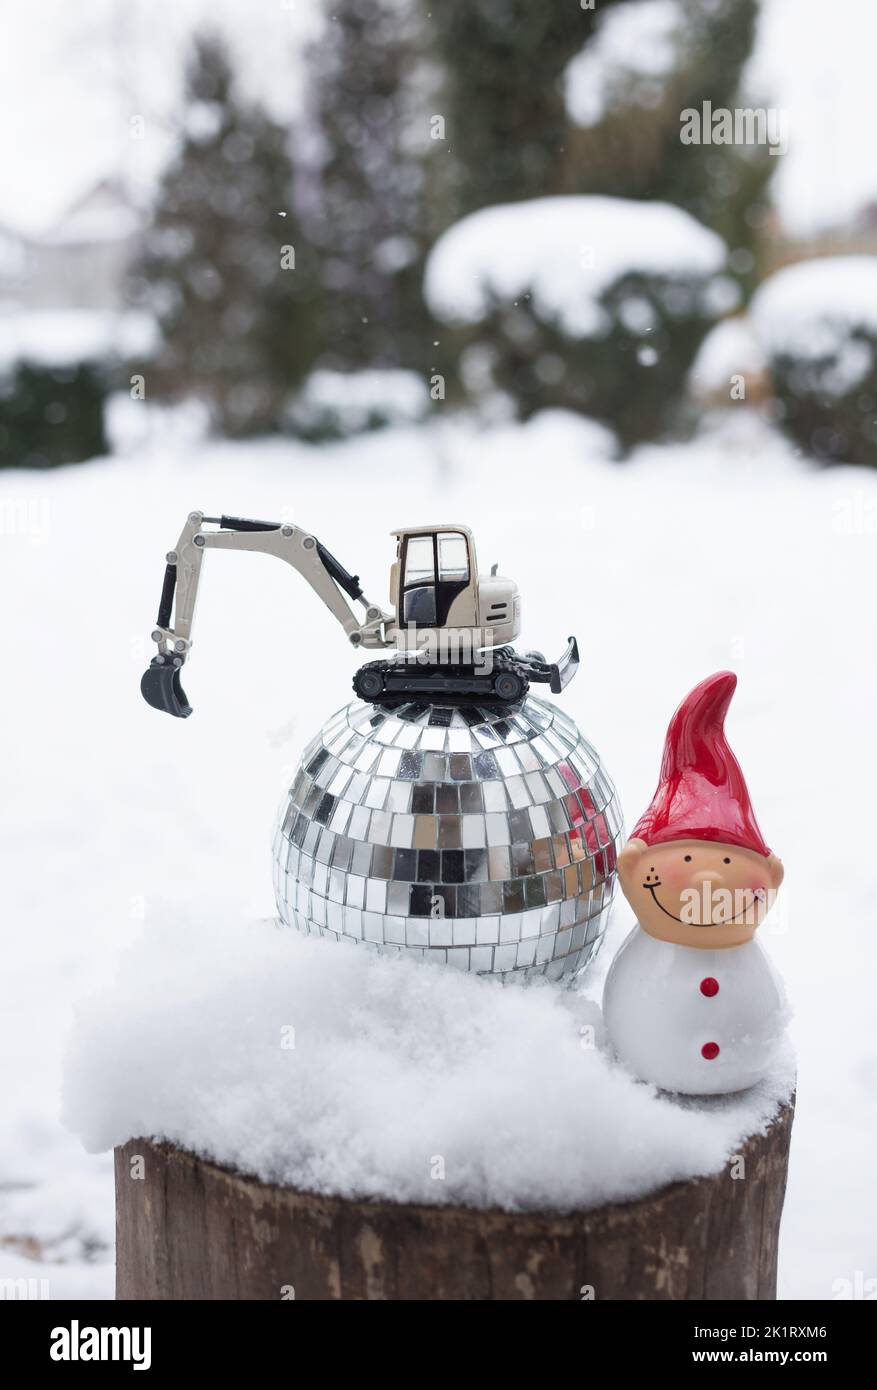 model of a toy metal excavator stands on a mirror disco ball, a souvenir snowman on a snow-covered stump. concept of christmas business greetings, win Stock Photo